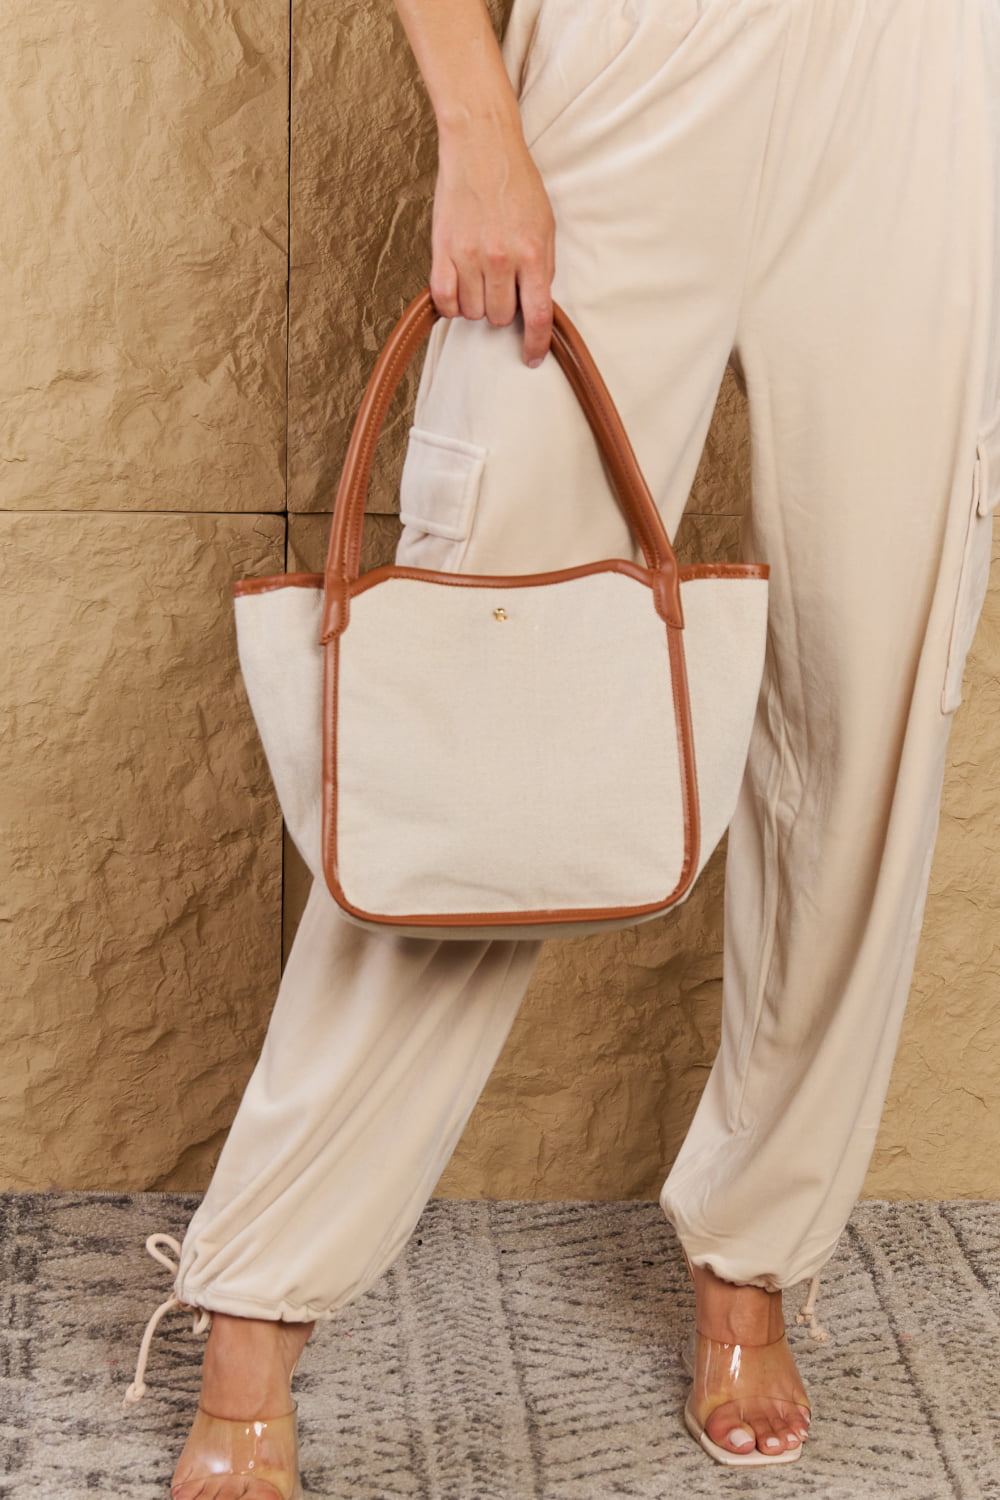 Fame Beach Chic Faux Leather Trim Tote Bag in Ochre - Online Only